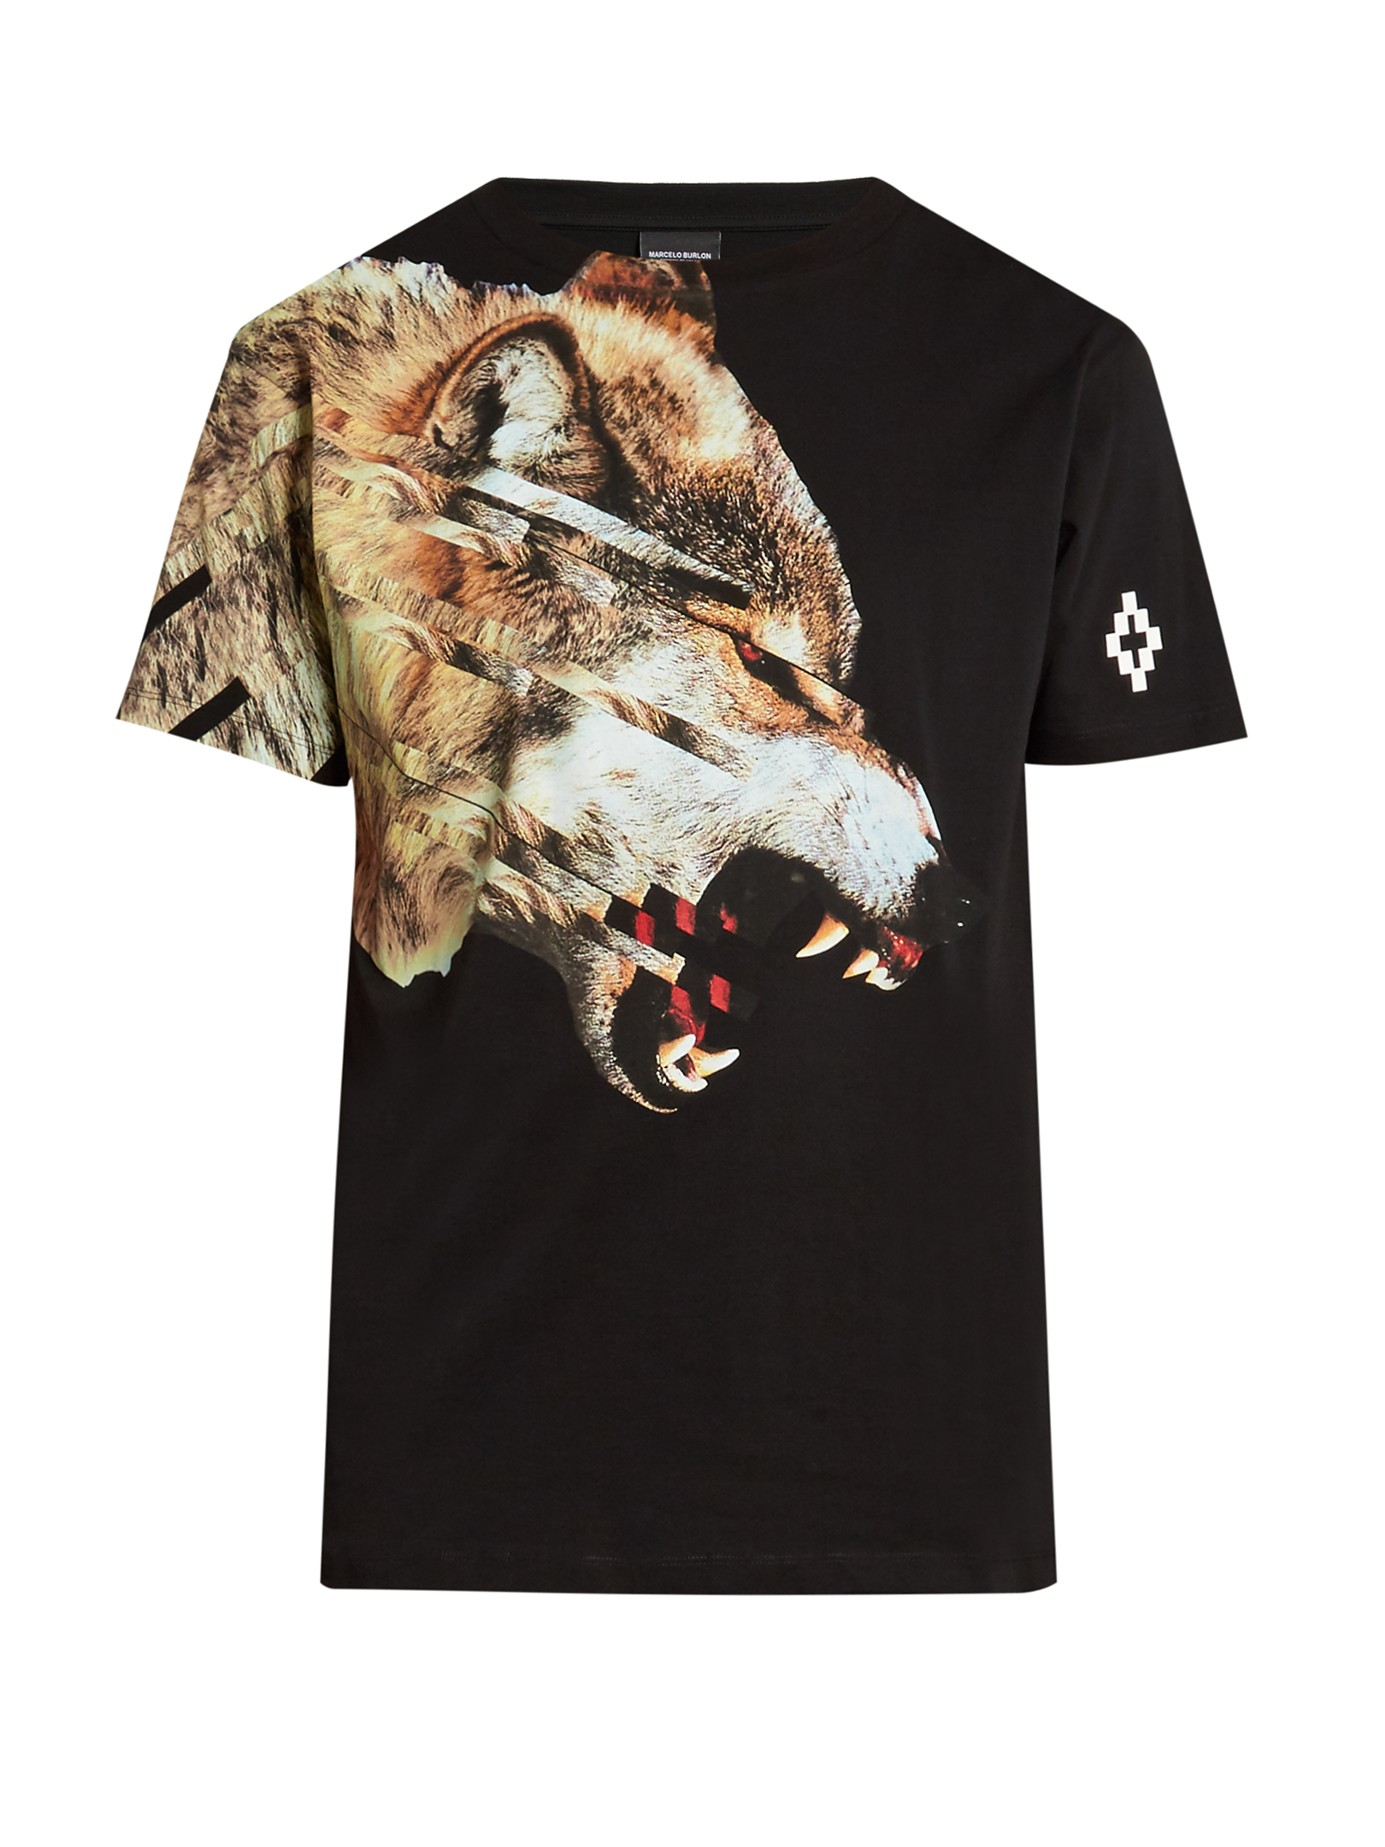 Decode radiator Stolpe Marcelo Burlon Cotton Cruces Wolf-print T-shirt in Black for Men - Lyst